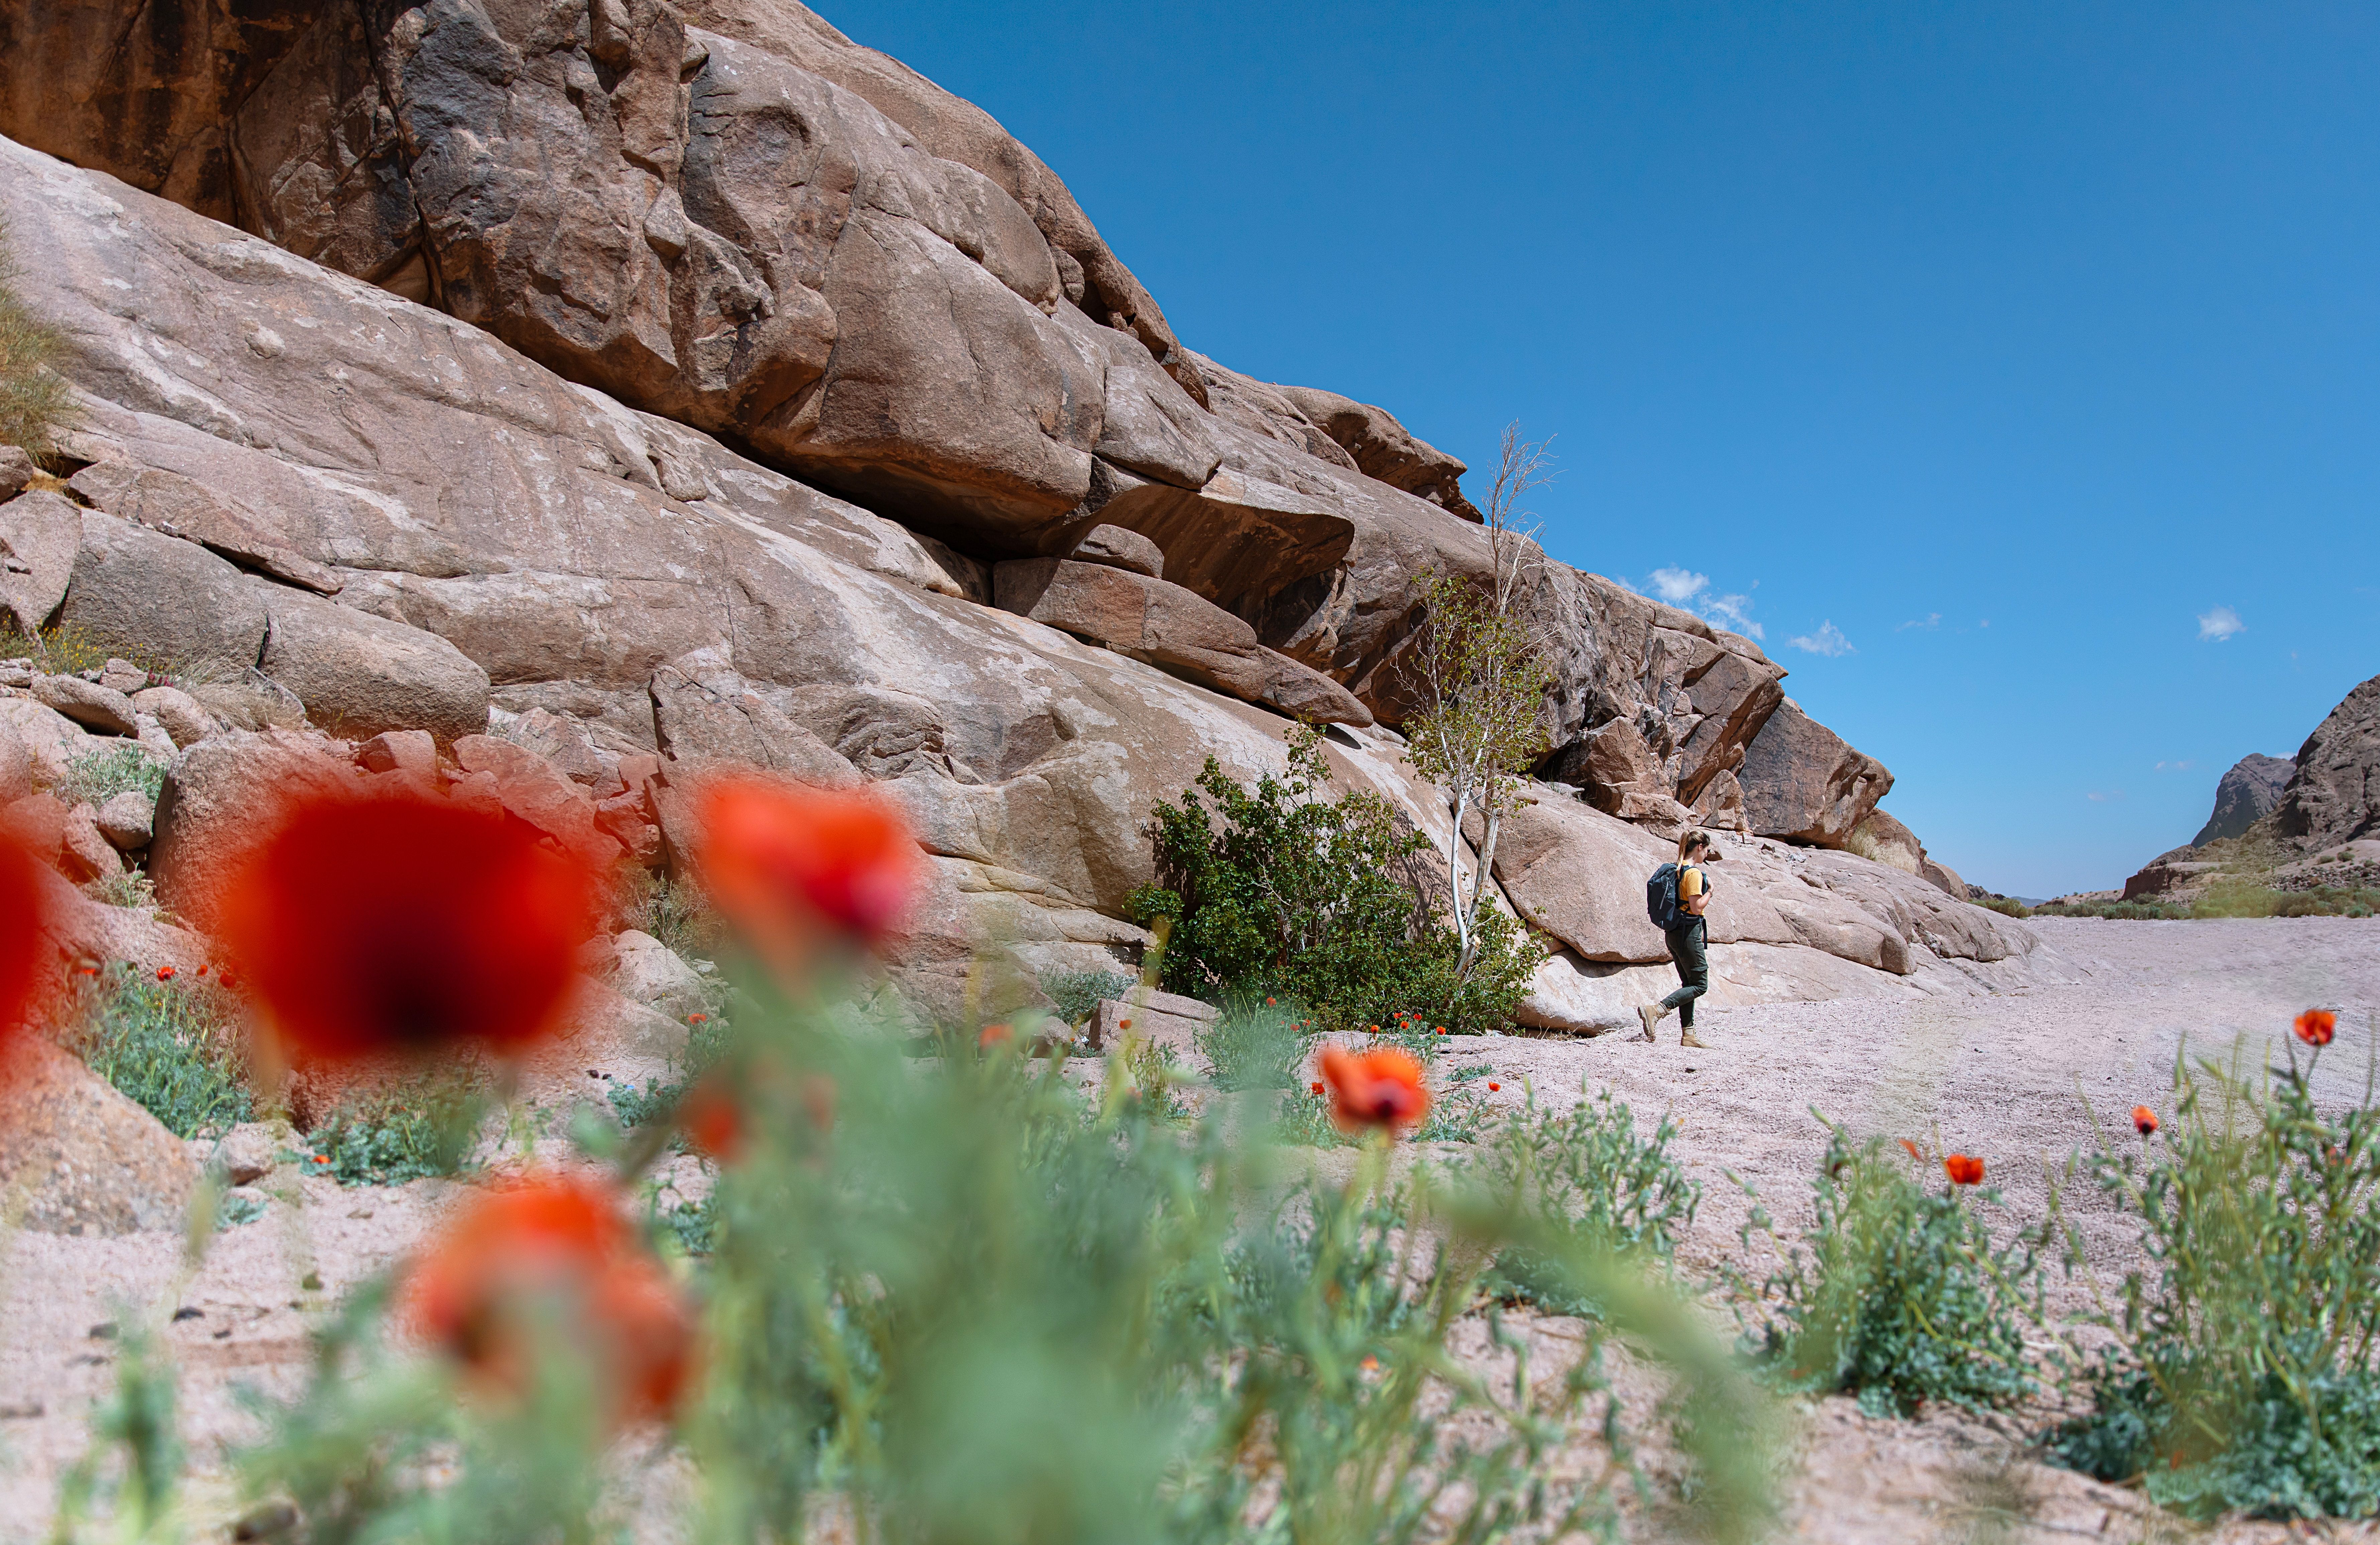 Person walking through a desert with poppy flowers